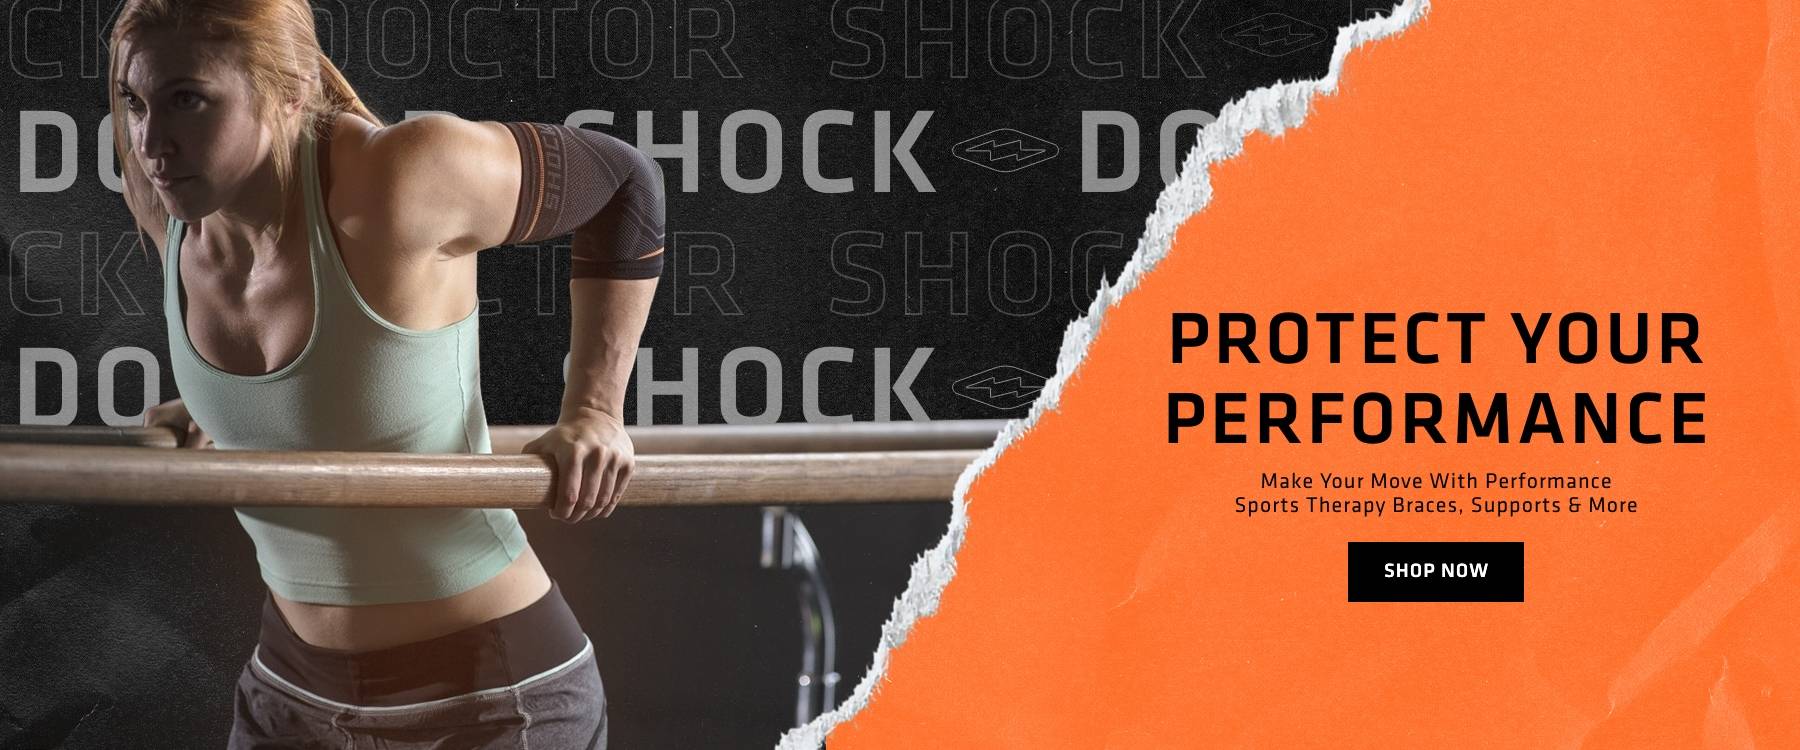 Protect Your Performance - Make Your Move With Perofrmance Sports Therapy Braces, Supports & More - Shop Now